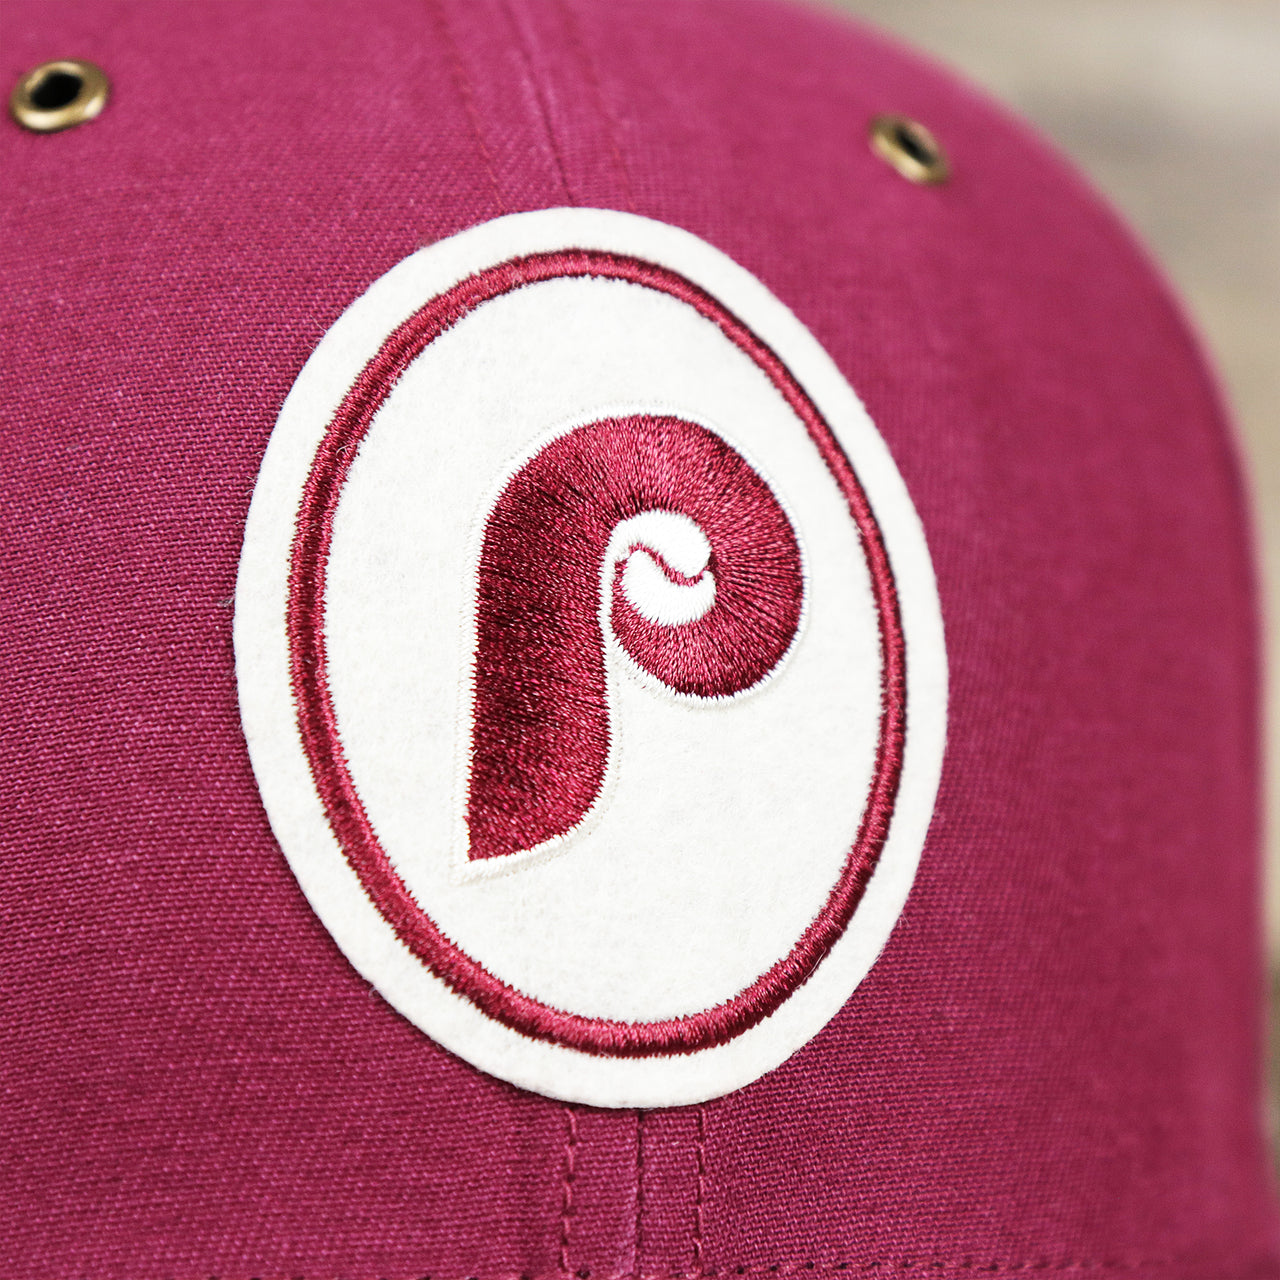 The Felt Phillies Logo on the Cooperstown Philadelphia Phillies Felt Phillies Logo Snapback Hat | Cardinal Snapback Cap